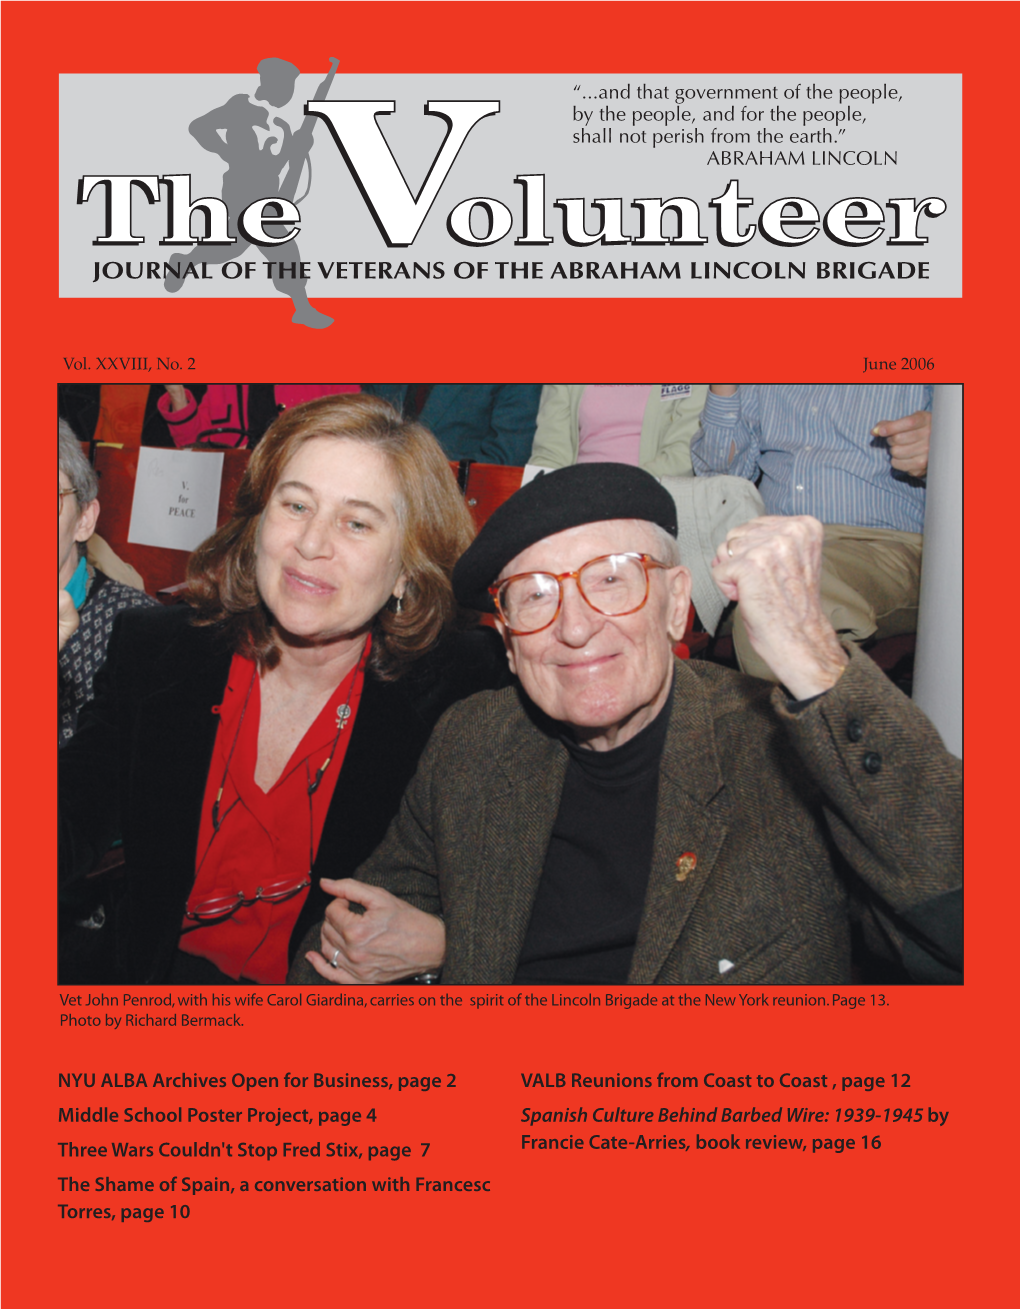 The Volunteer the Volunteer Welcomes Paid Advertising Consistent with ALBA’S Broad Educational and Cultural Mission